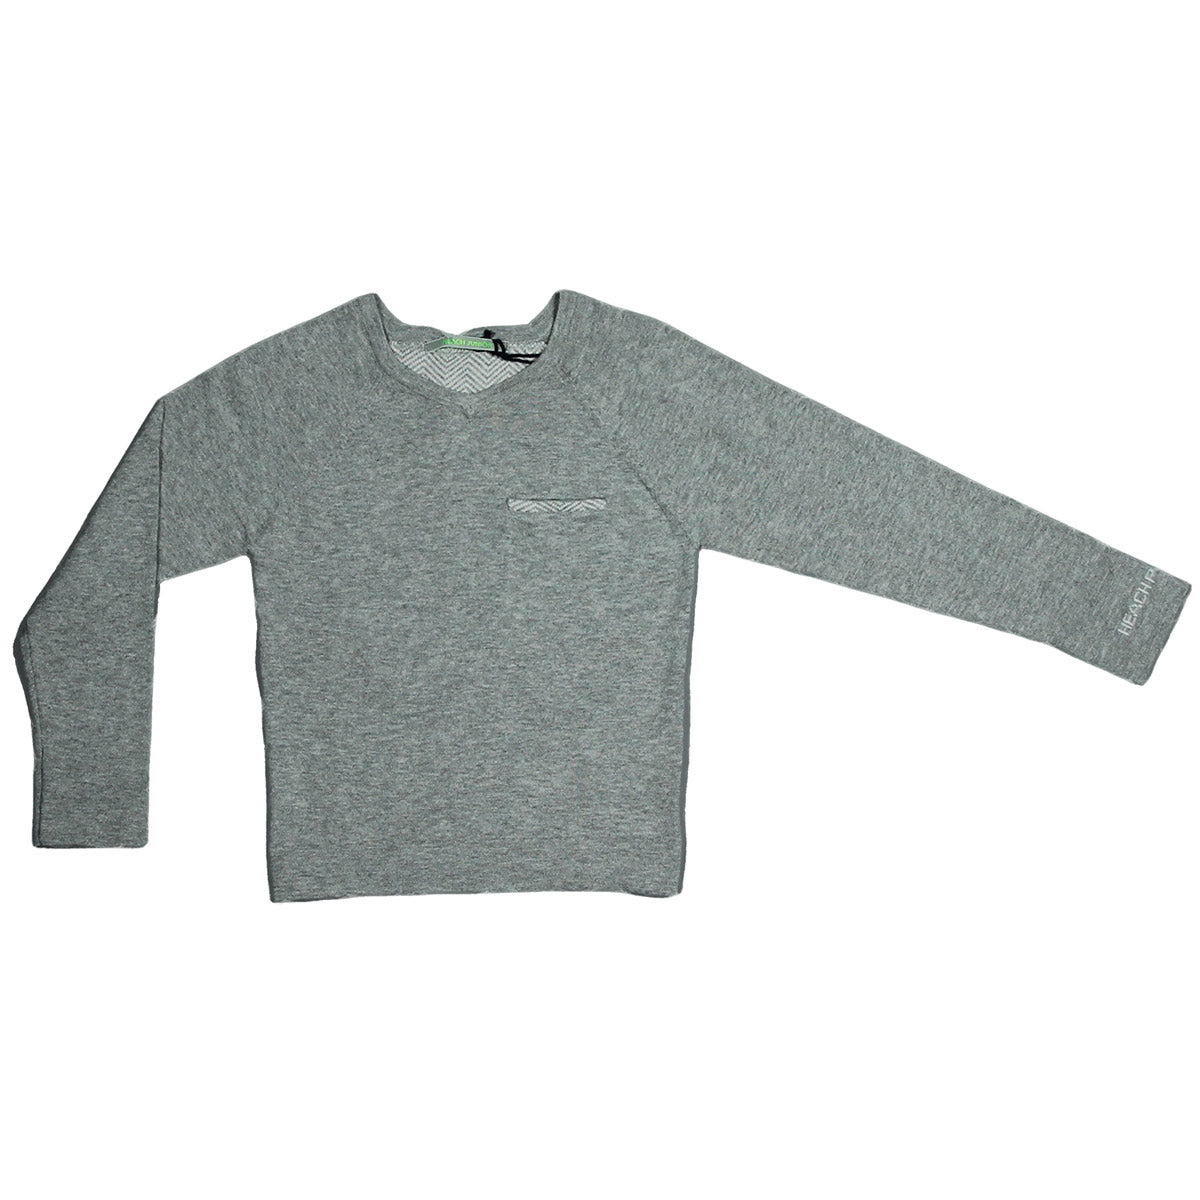 Pull from the Silvian Heach Kids children's clothing line, solid color, with patterned inserts on...